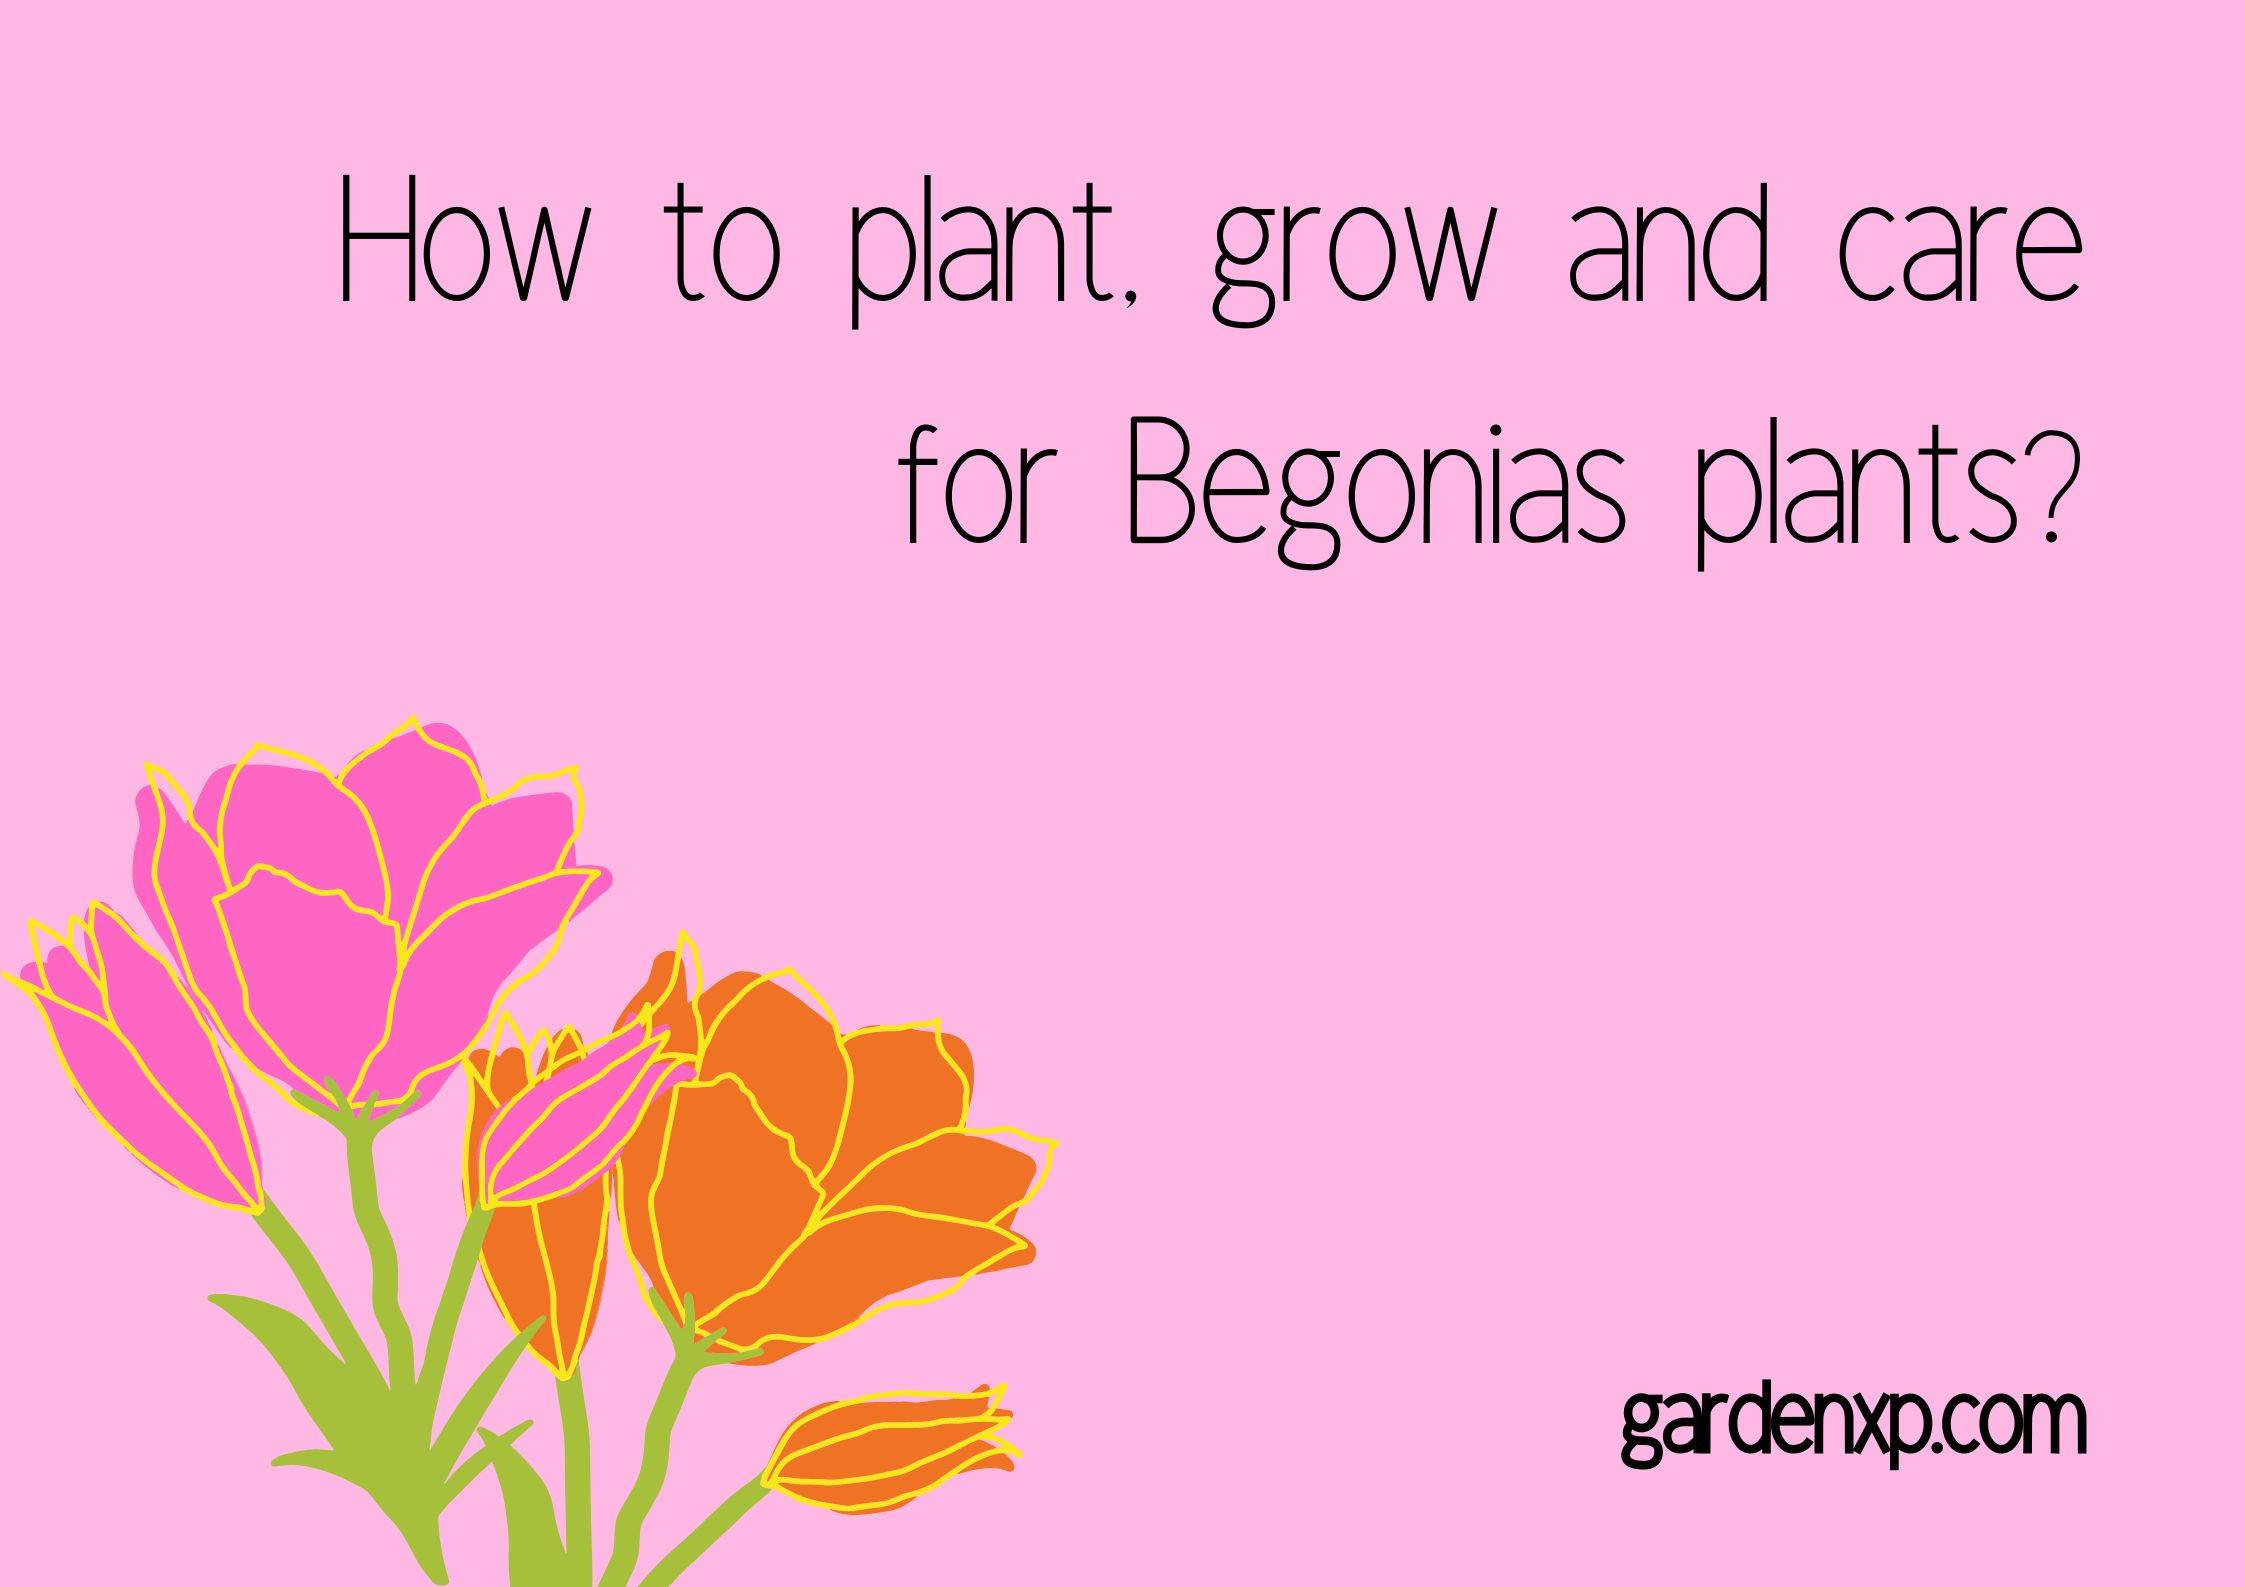 How to plant, grow and care for Begonias plants?